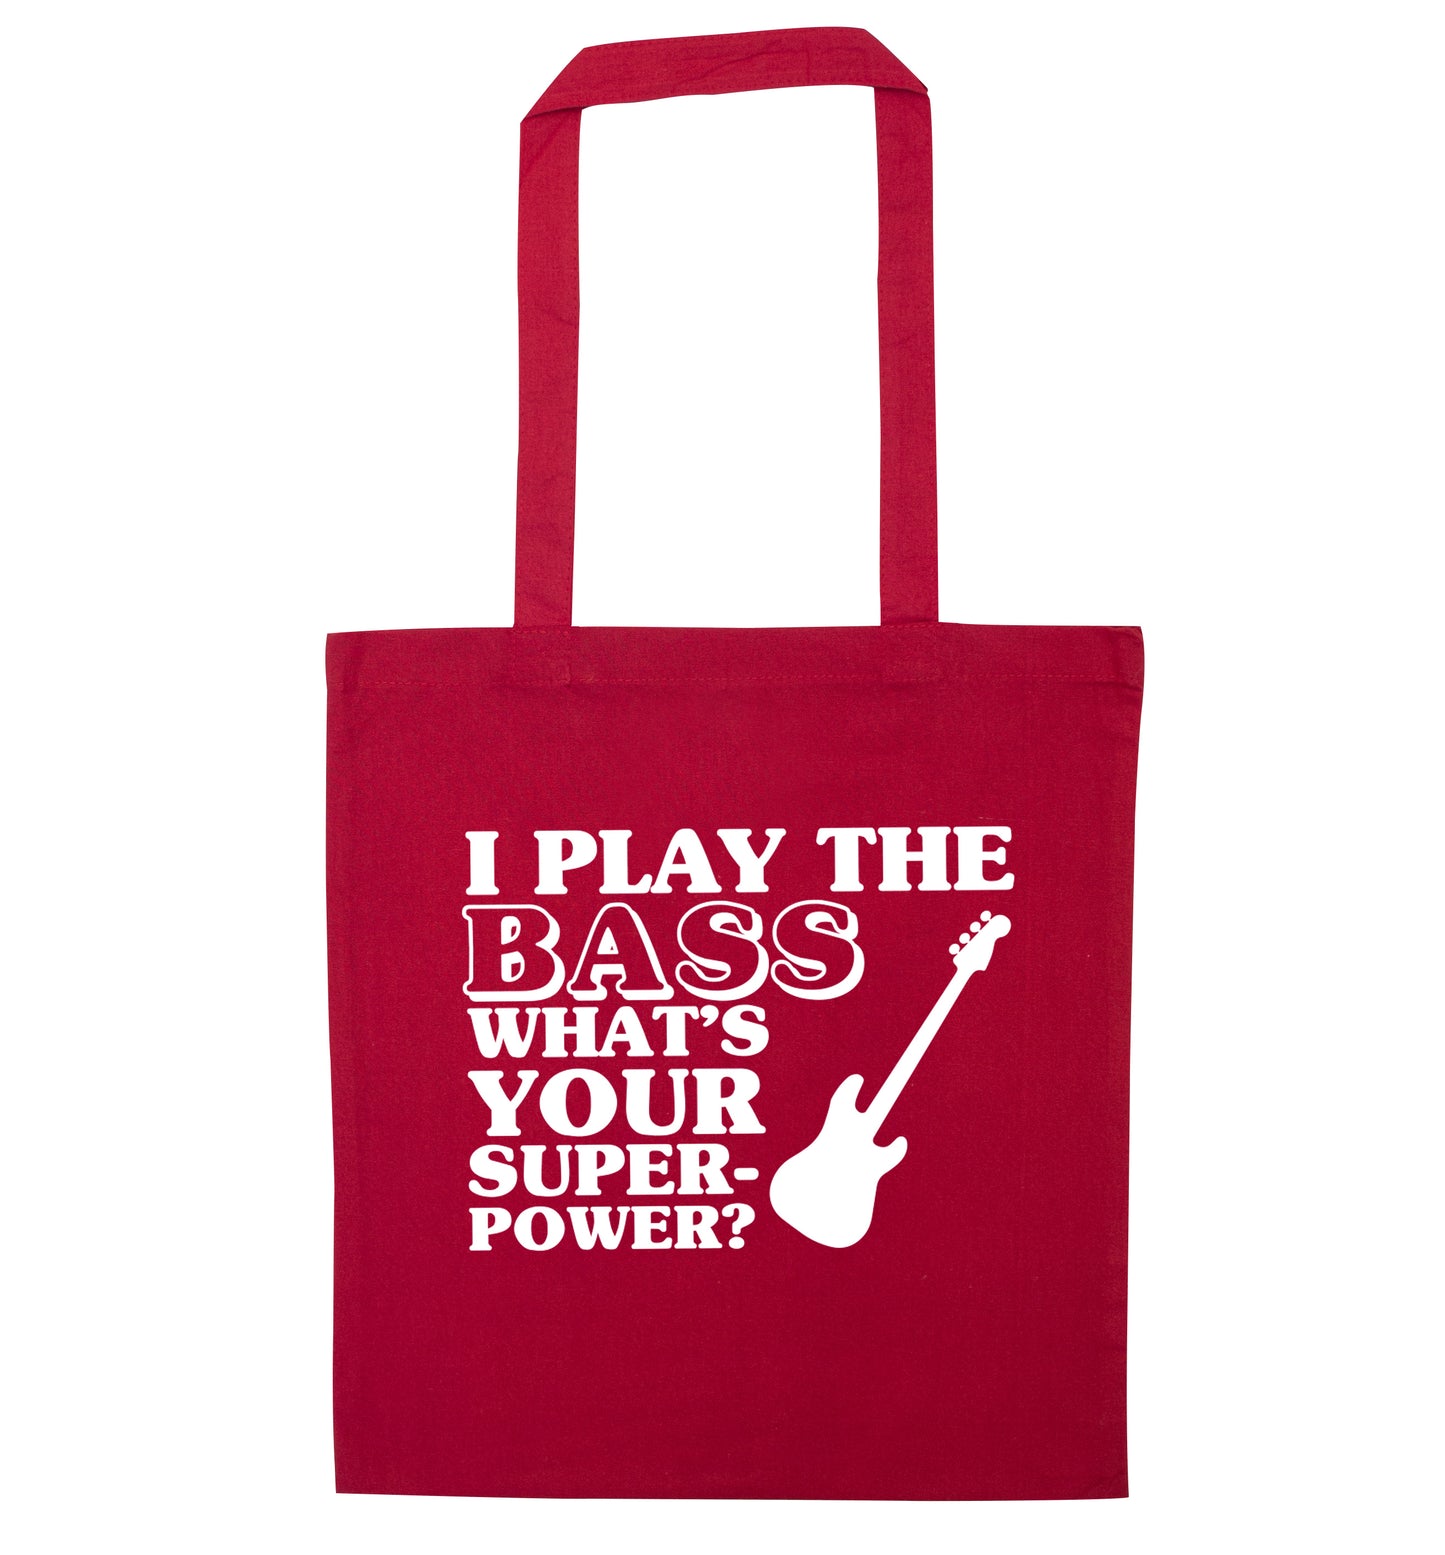 I play the bass what's your superpower? red tote bag